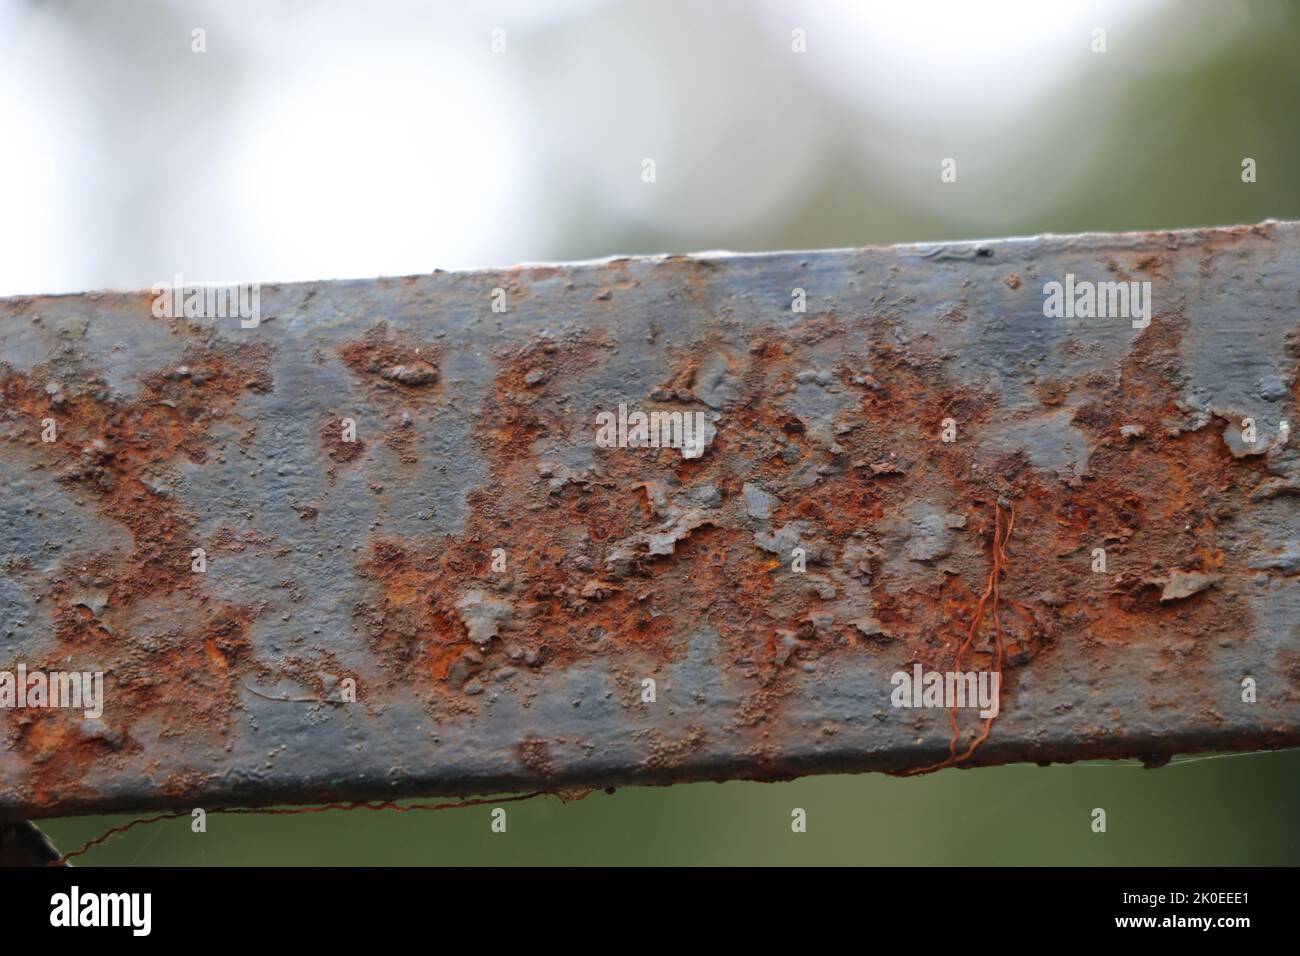 View of a Rust accumulated on an iron bar in outdoor natural light Stock Photo